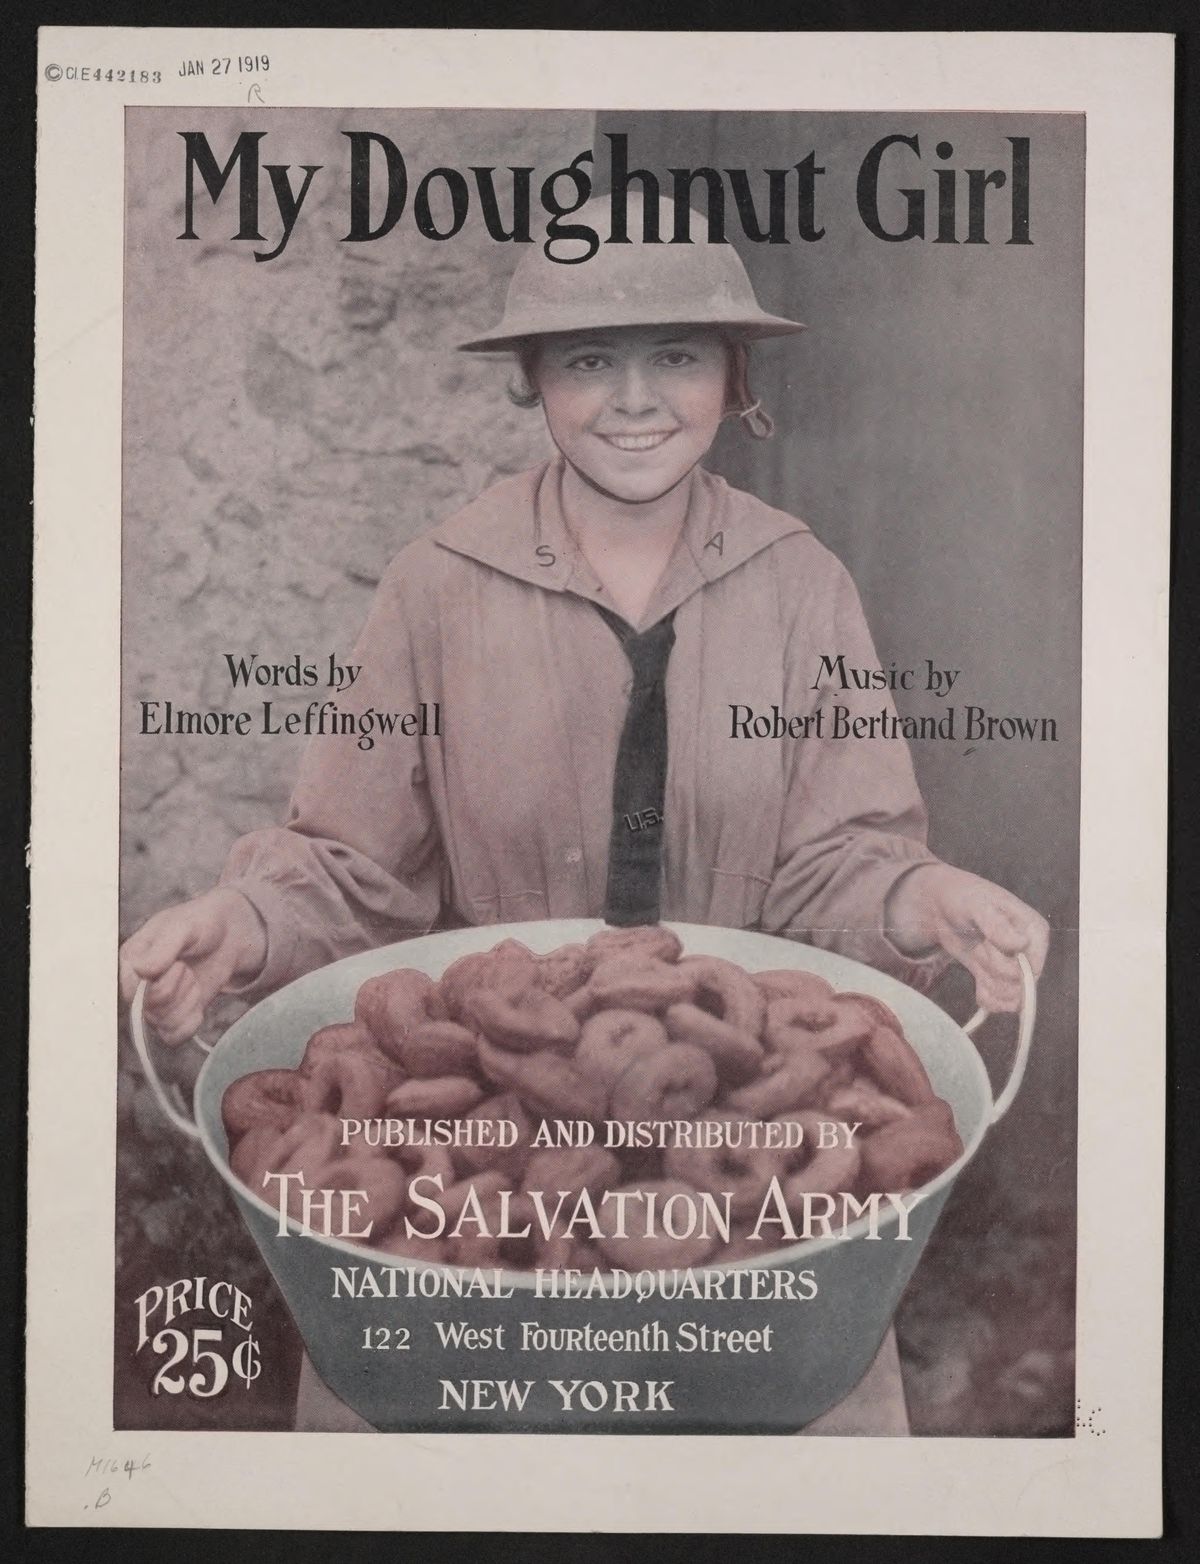 The front cover of the songbook for “My Doughnut Girl” displays a girl who appears to be in her mid-teens carrying a